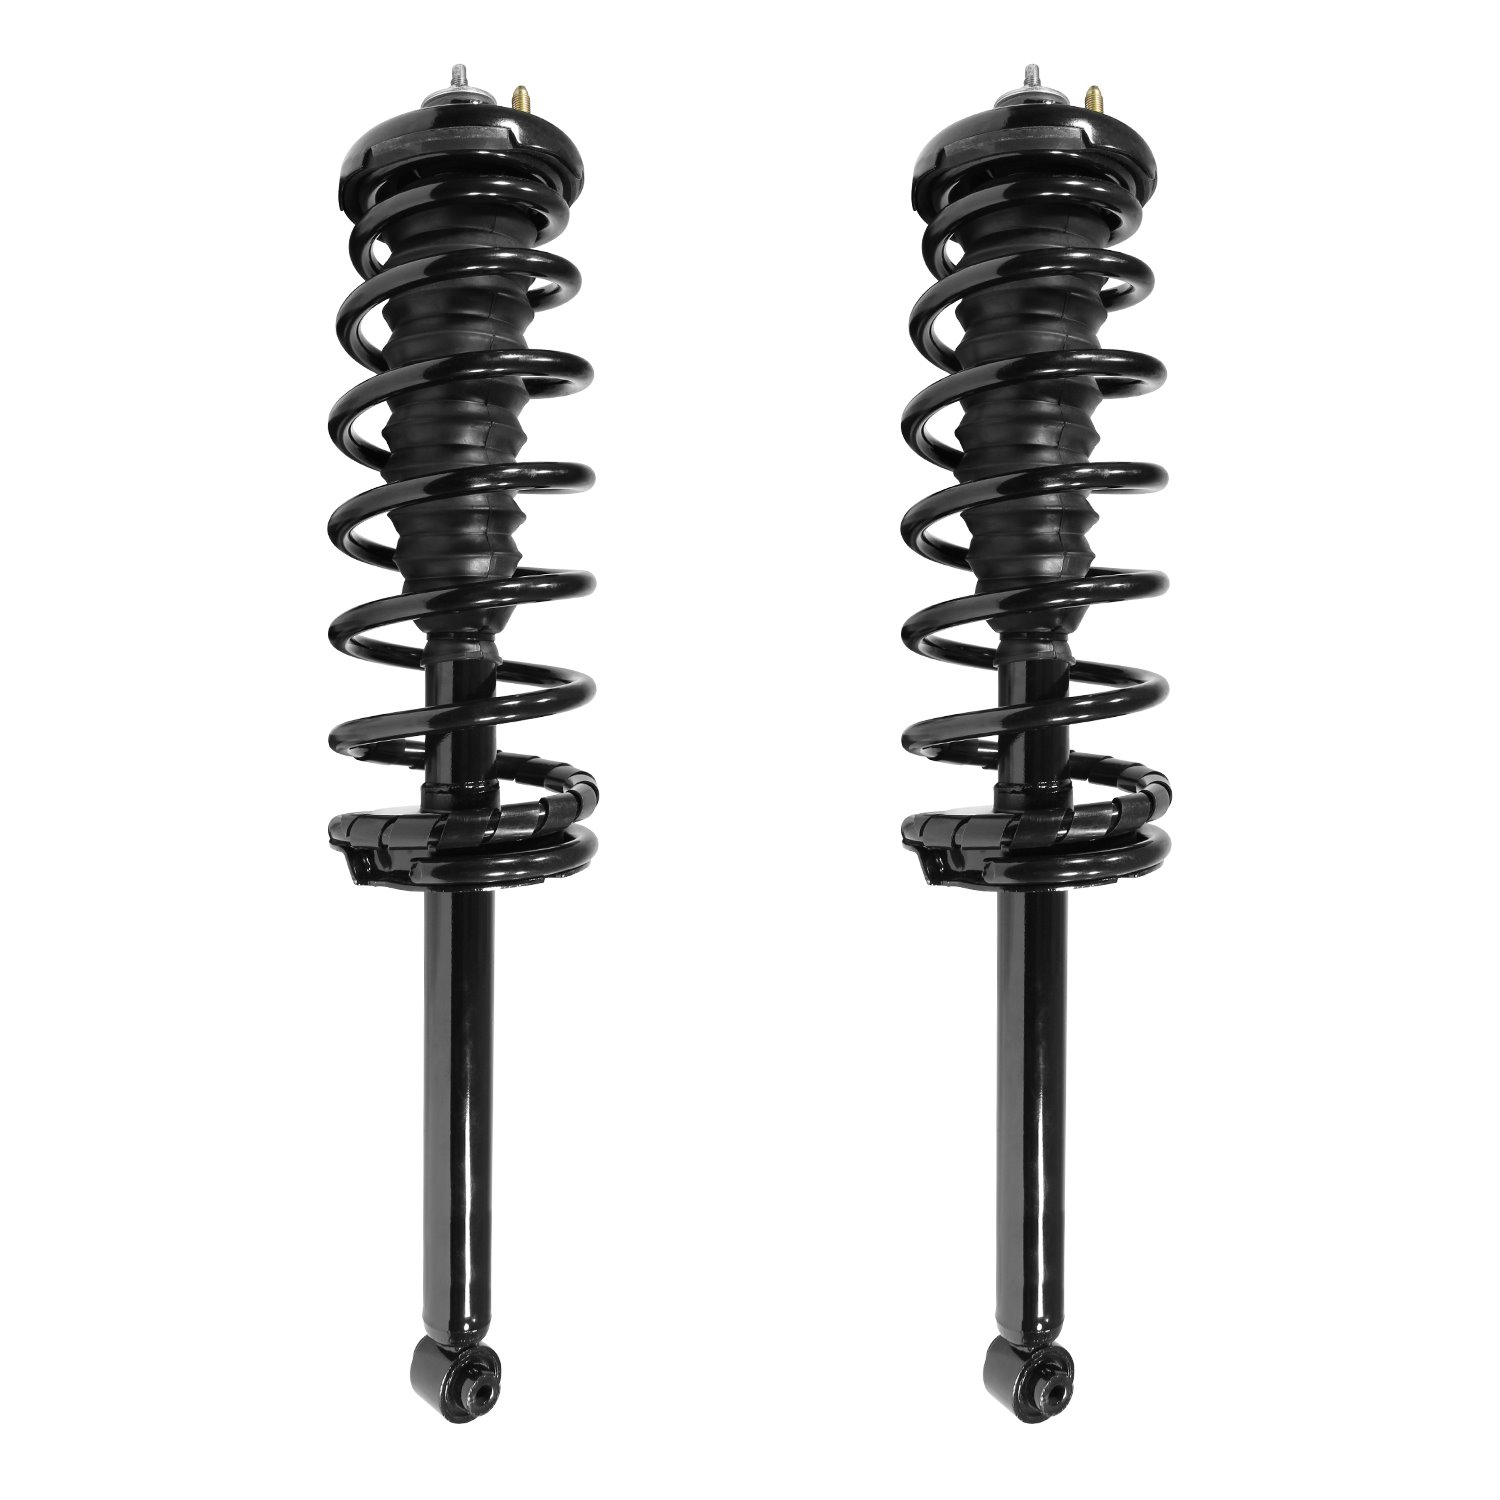 2-15280-001 Suspension Strut & Coil Spring Assembly Set Fits Select Acura CL, Honda Accord